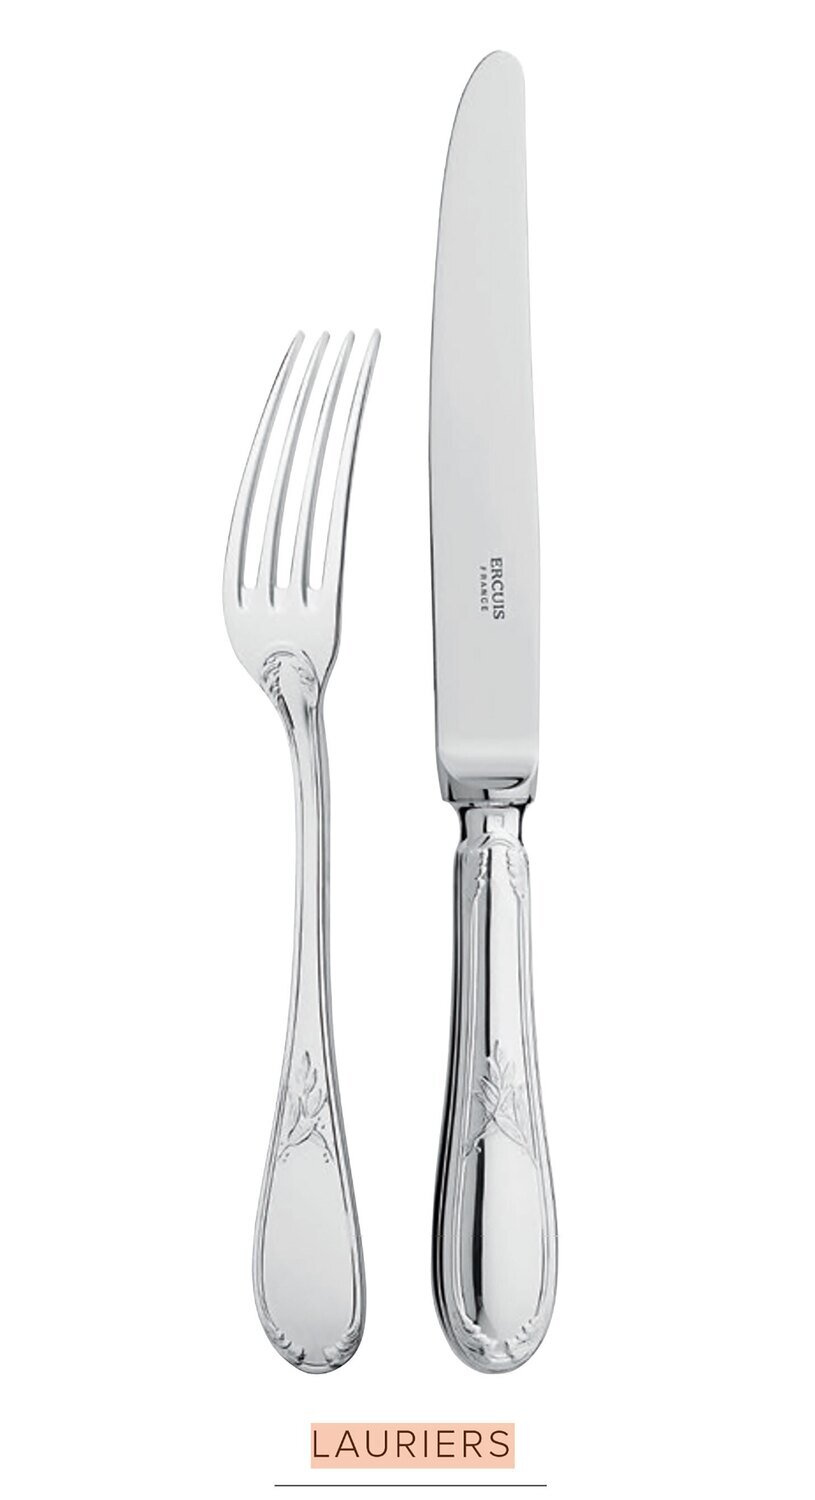 Ercuis Lauriers Bouillon Spoon Silver Plated F650460-95